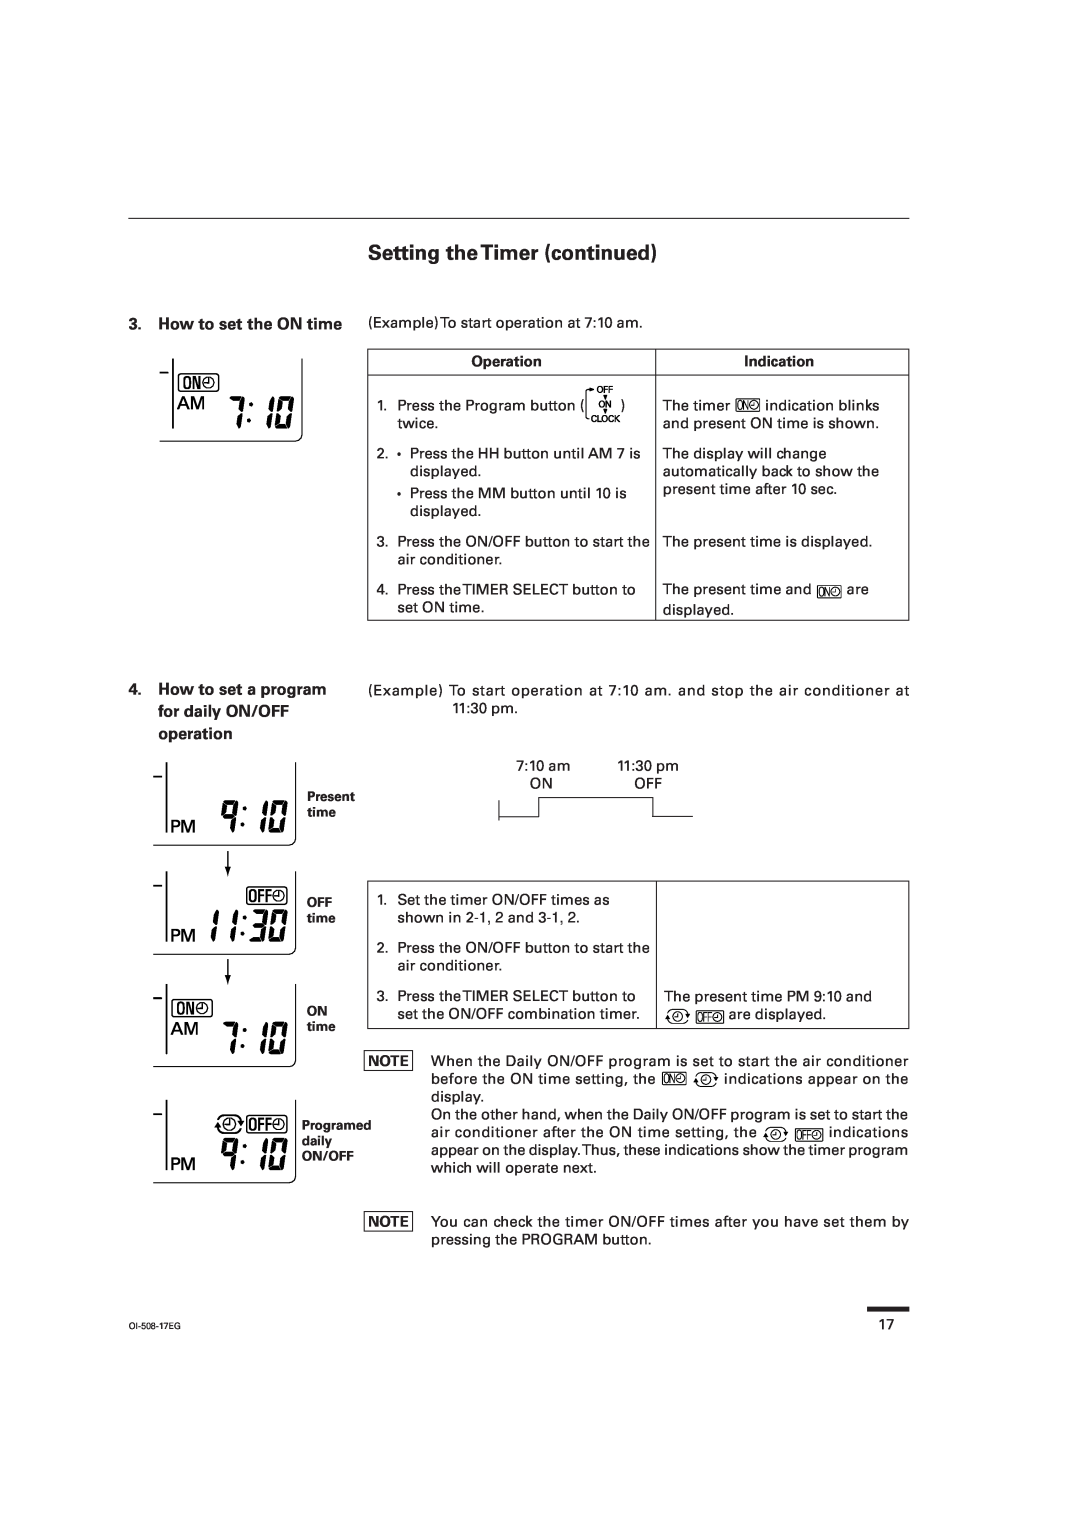 Sanyo KS2462R Setting the Timer continued, How to set a program for daily ON/OFF operation, Operation, Indication 